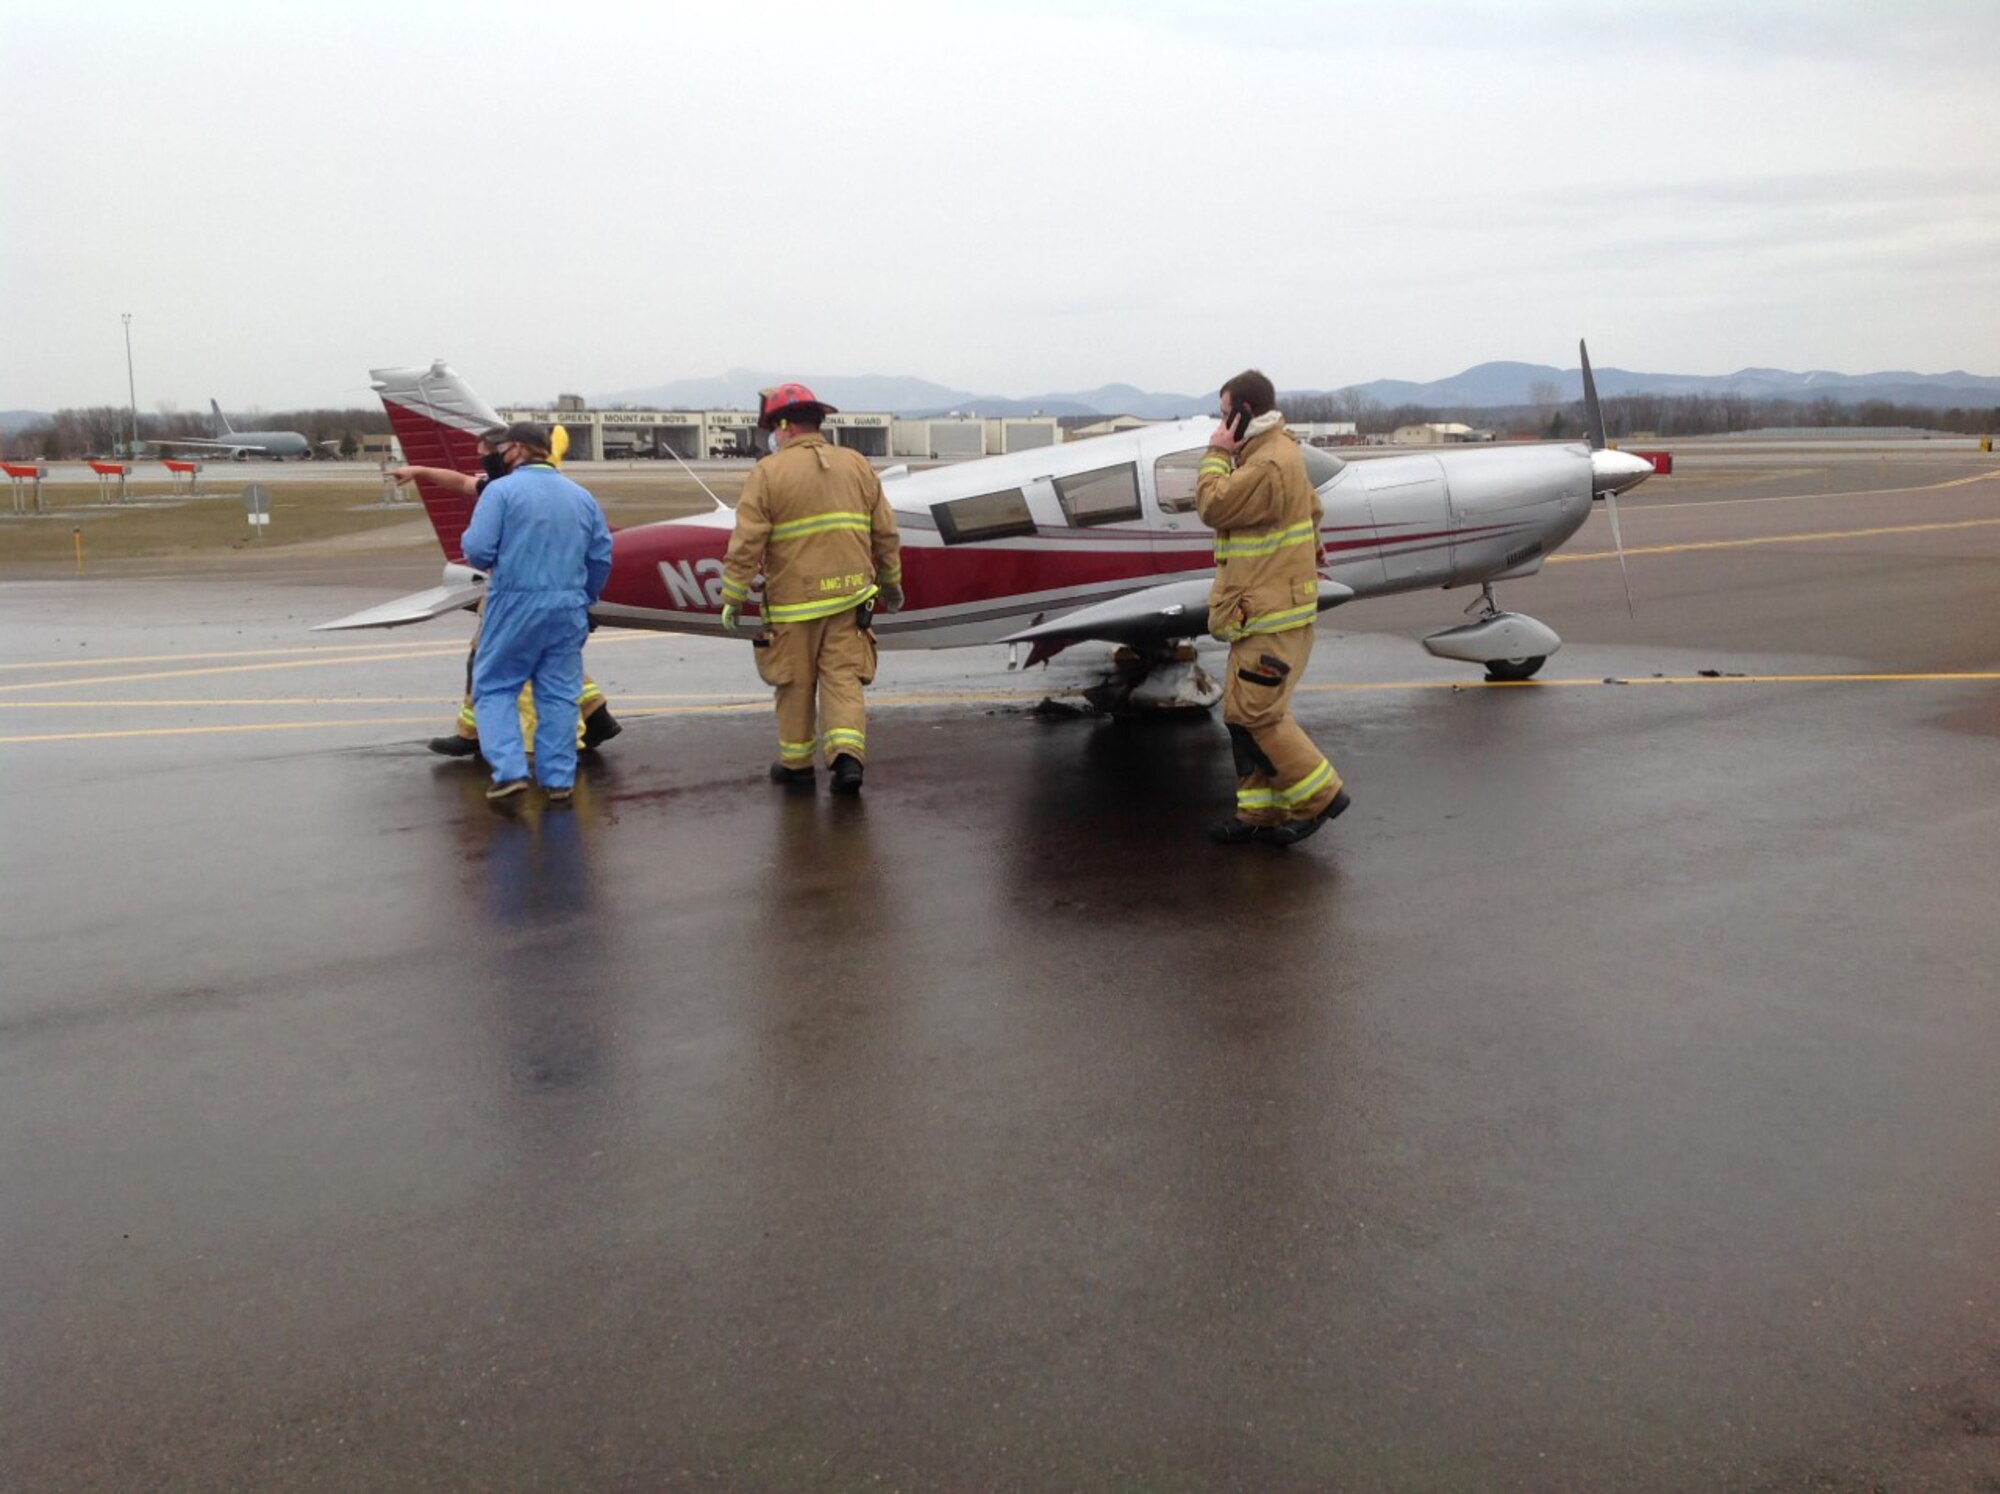 The Vermont National Guard''s 158th Fire Department responded to a civilian aircraft fire on a runway of Burlington International Airport the evening of March 24, 2021. The pilot and family evacuated before Guard members arrived and extinguished the flames.